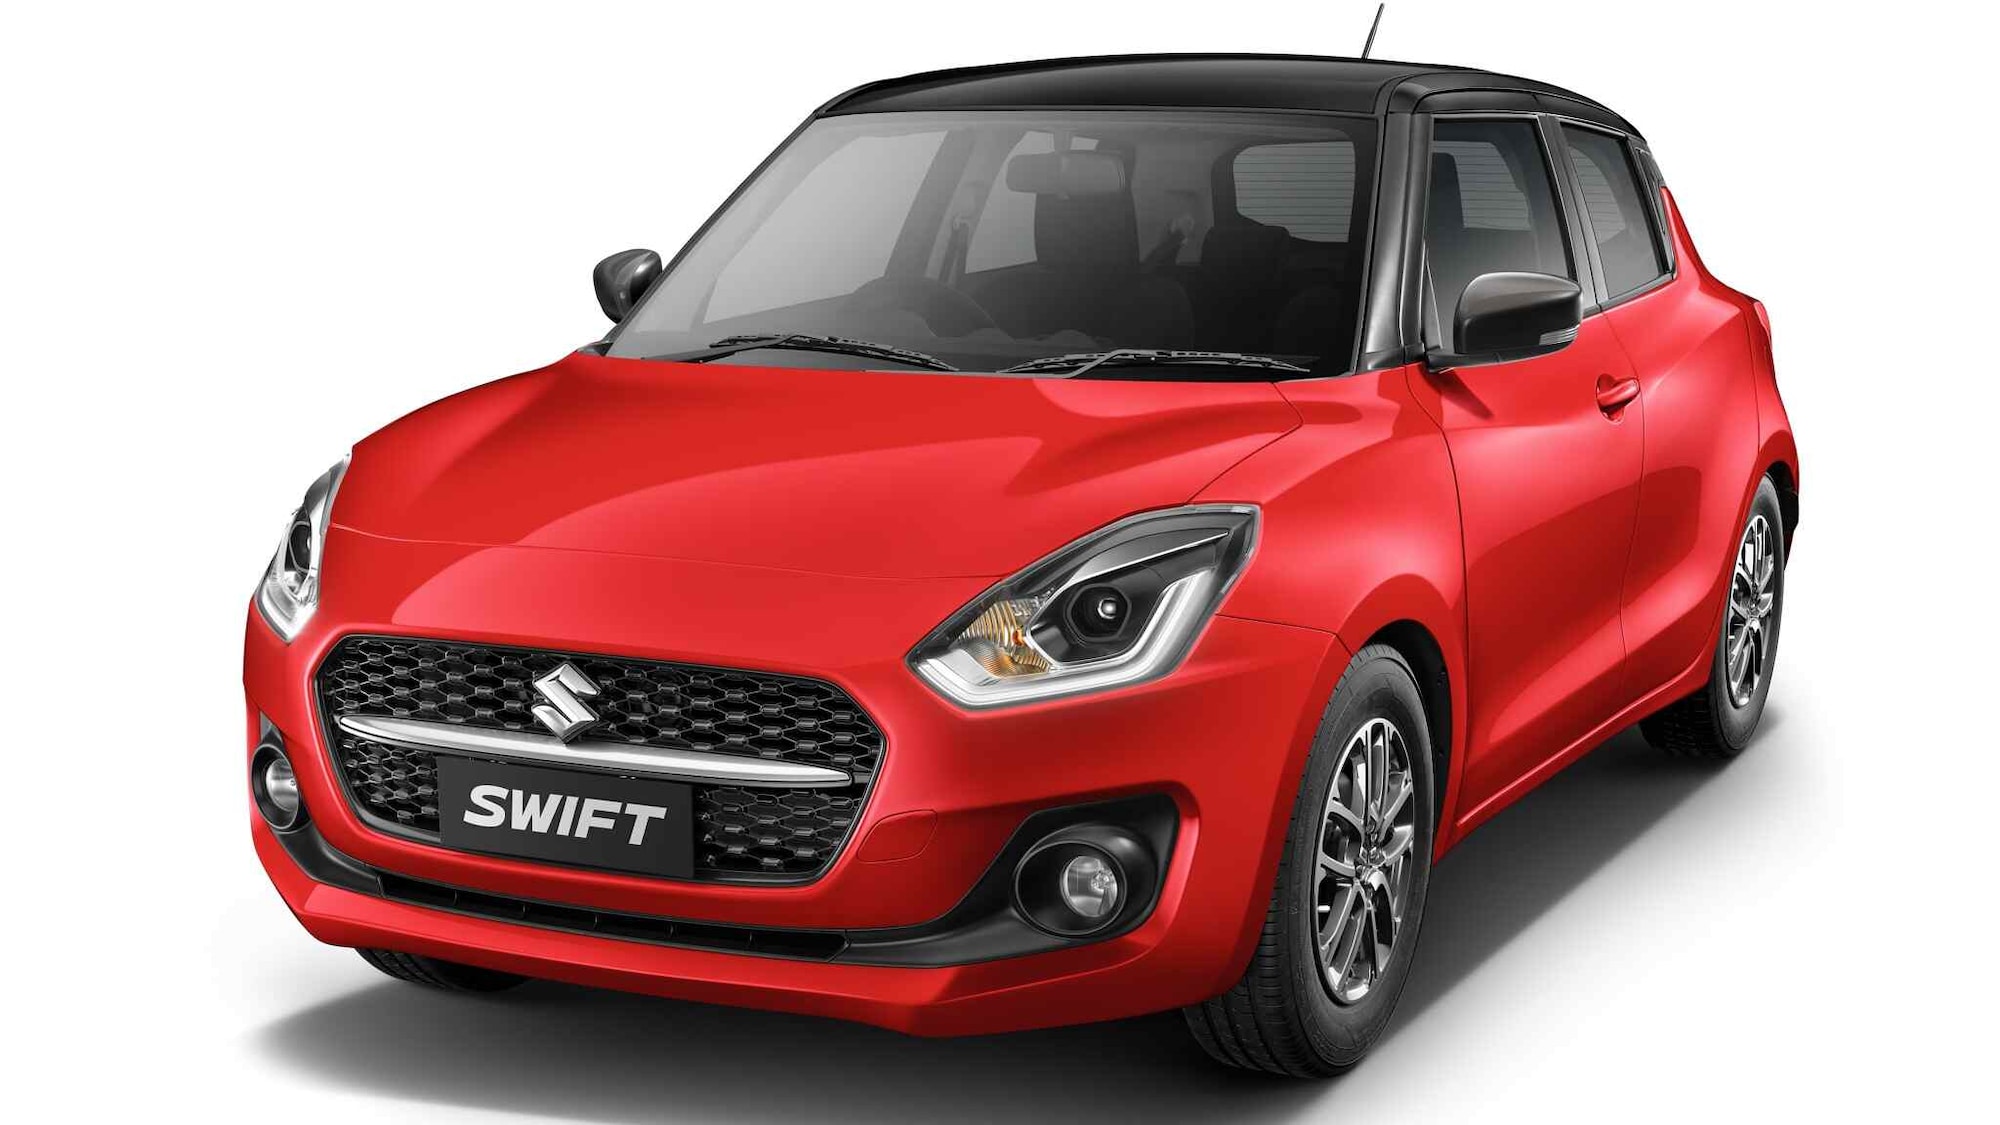 The Maruti Suzuki Swift facelift's 1.2-litre DualJet engine is more powerful and more fuel-efficient than the K12B unit it replaces. Image: Maruti Suzuki